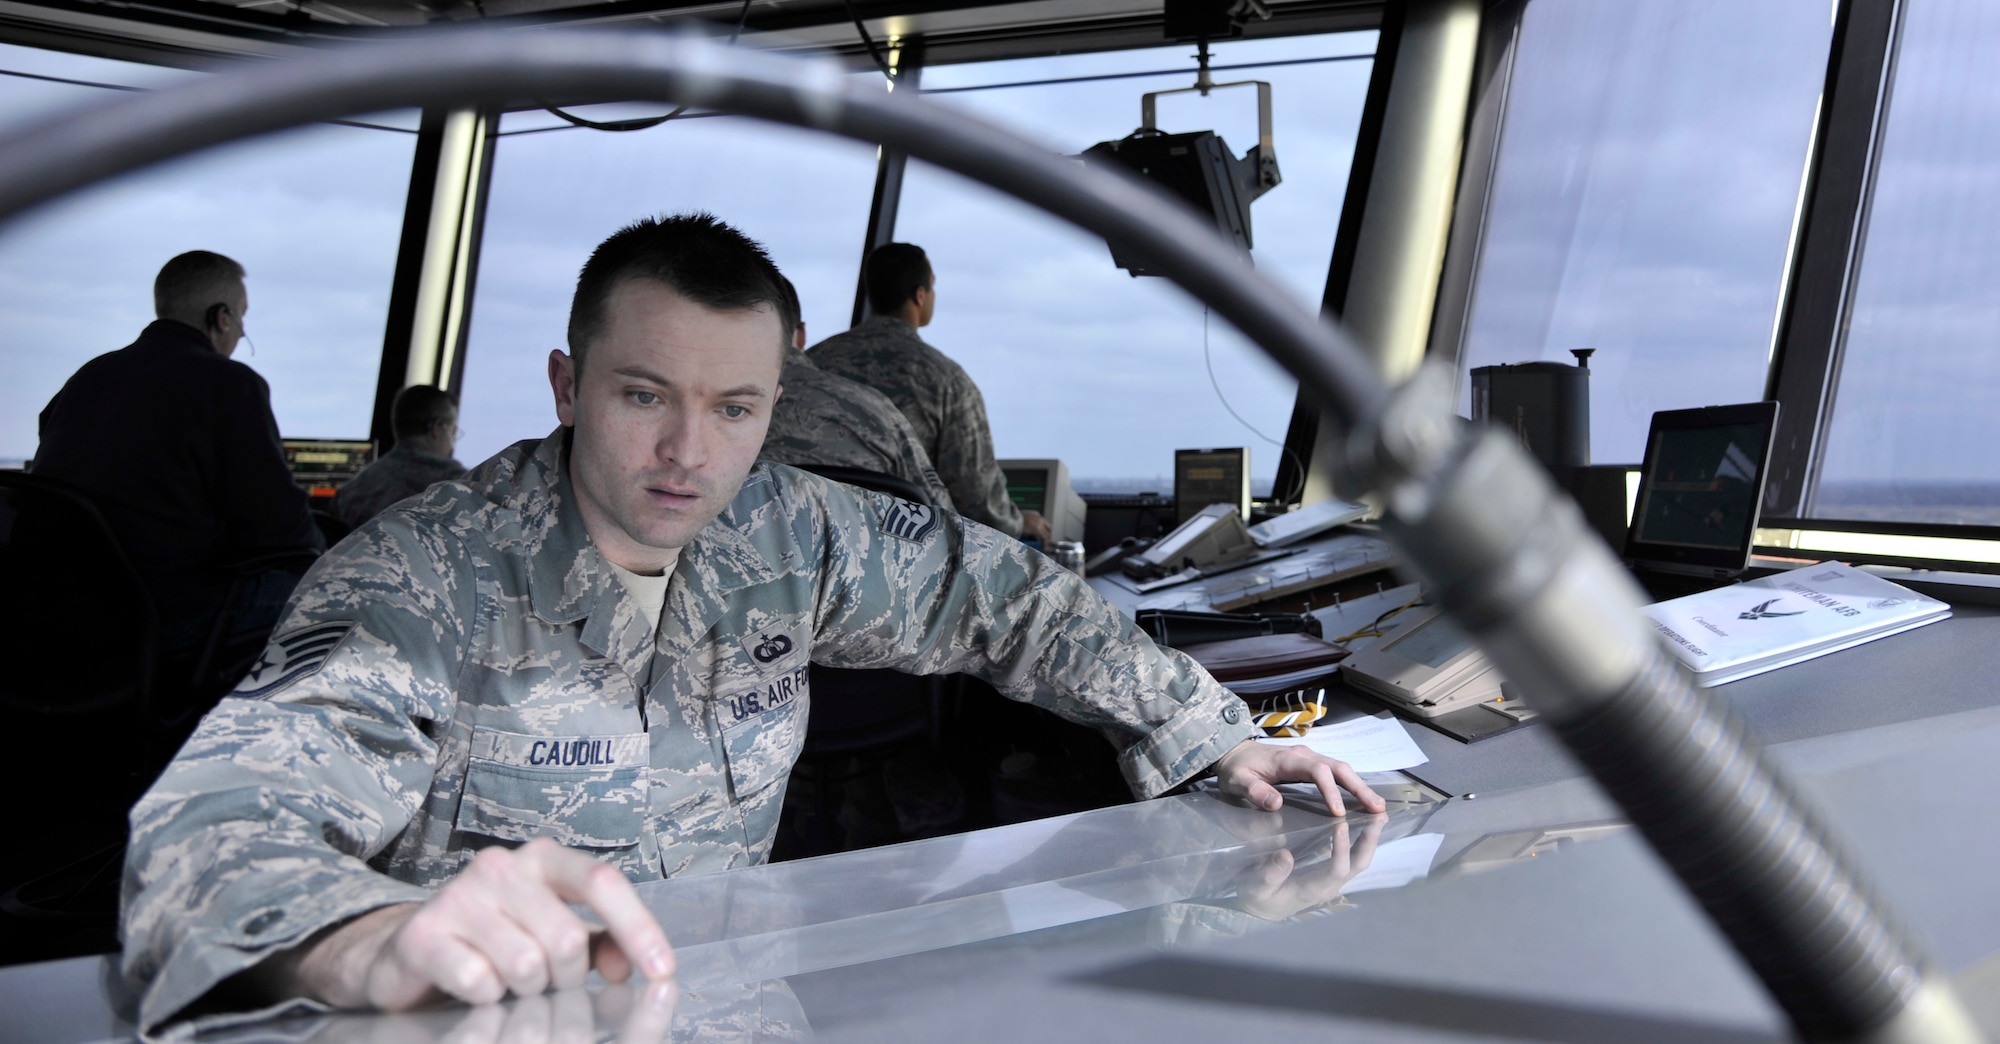 Staff Sgt. Blaine Caudill, 509th Operations Support Squadron air traffic control watch supervisor, reviews a crash grid map at Whiteman Air Force Base, Mo., March 11, 2013. In the event of an aircraft crash, the map is used to provide a detailed location of the crash site. (U.S. Air Force photo by Airman 1st Class Keenan Berry/Released)